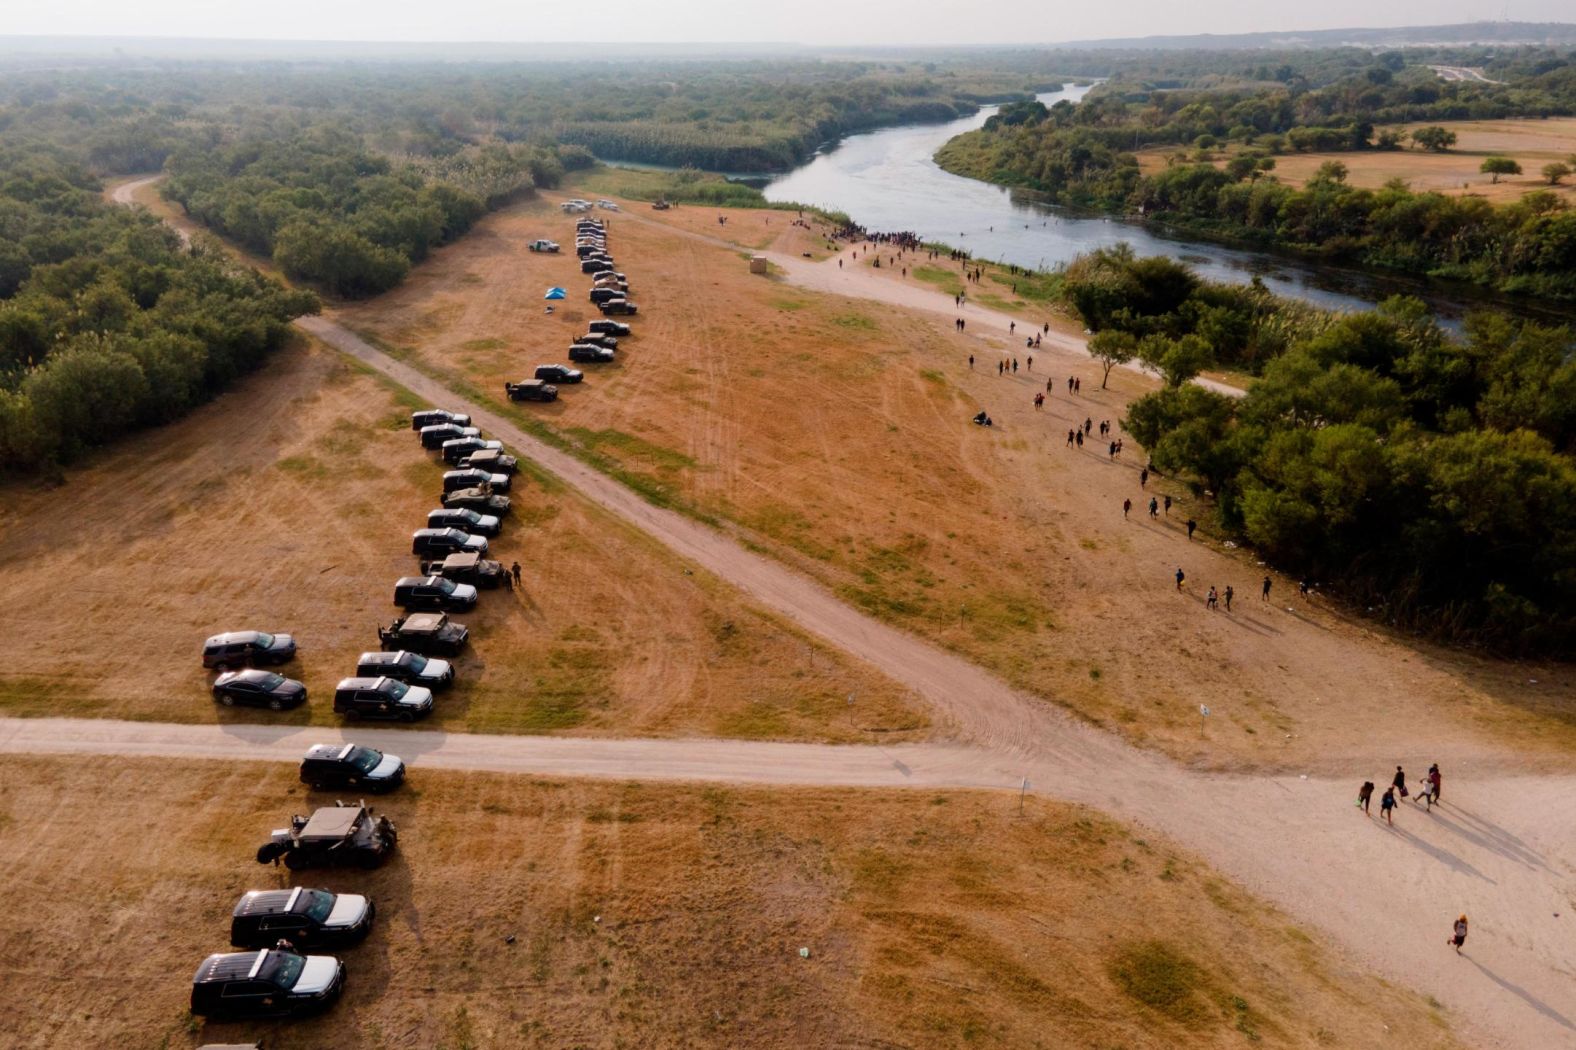 Vehicles line up along the banks of the Rio Grande near the Del Rio encampment on September 21. Texas Gov. Greg Abbott said officials are using "unprecedented" methods to deter migrants from crossing into the state, including parking Texas National Guard and Texas Department of Public Safety vehicles for miles along the border to create a <a href="index.php?page=&url=https%3A%2F%2Fwww.cnn.com%2F2021%2F09%2F21%2Fus%2Fdel-rio-texas-border-crisis%2Findex.html" target="_blank">"steel barrier."</a>